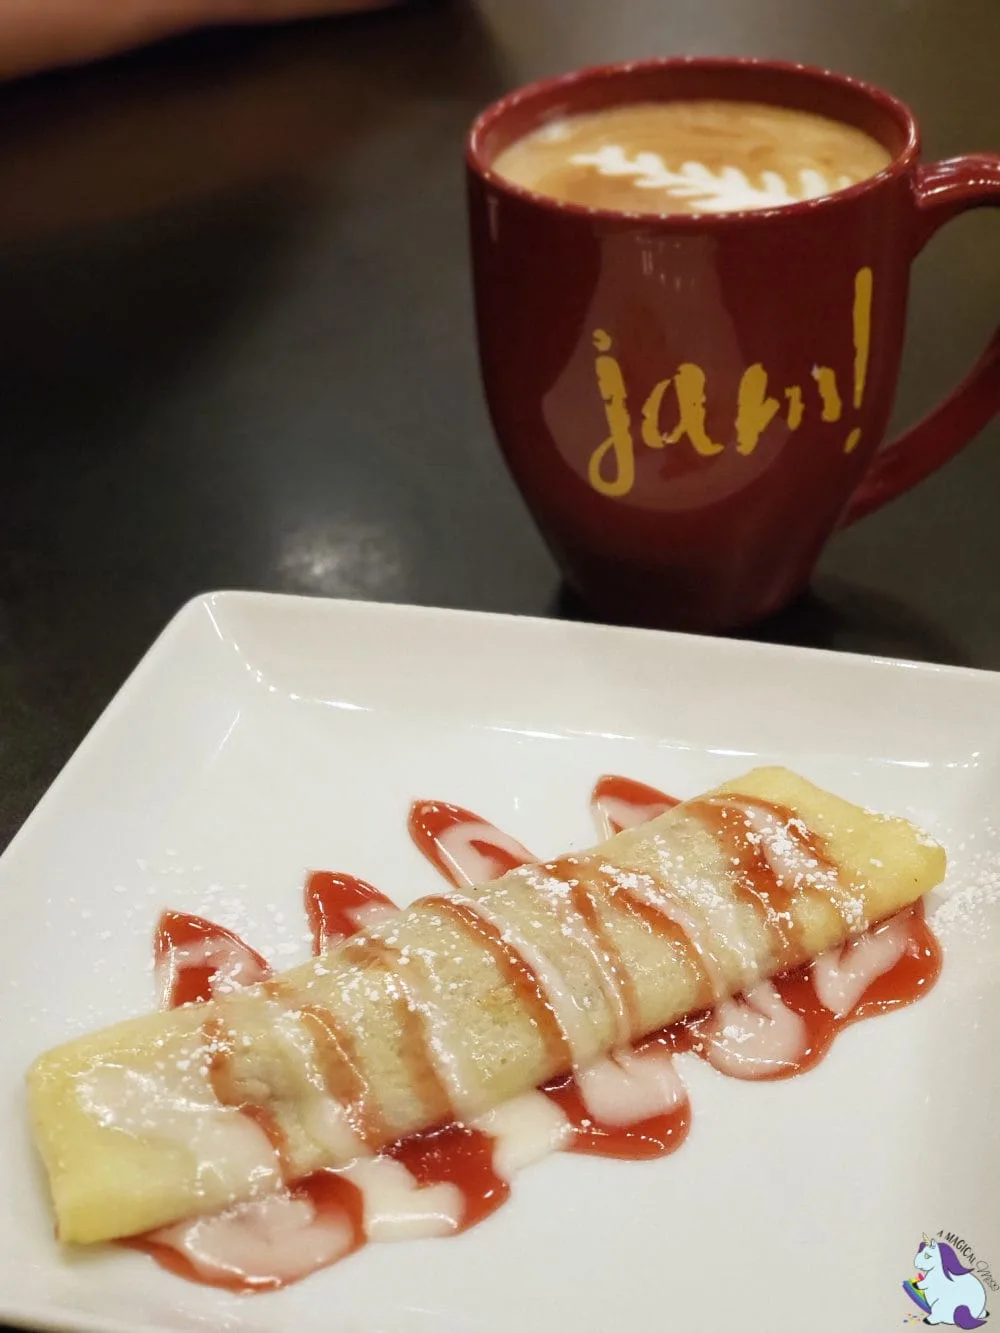 Crepe and latte from Jam! in Bozeman, MT.